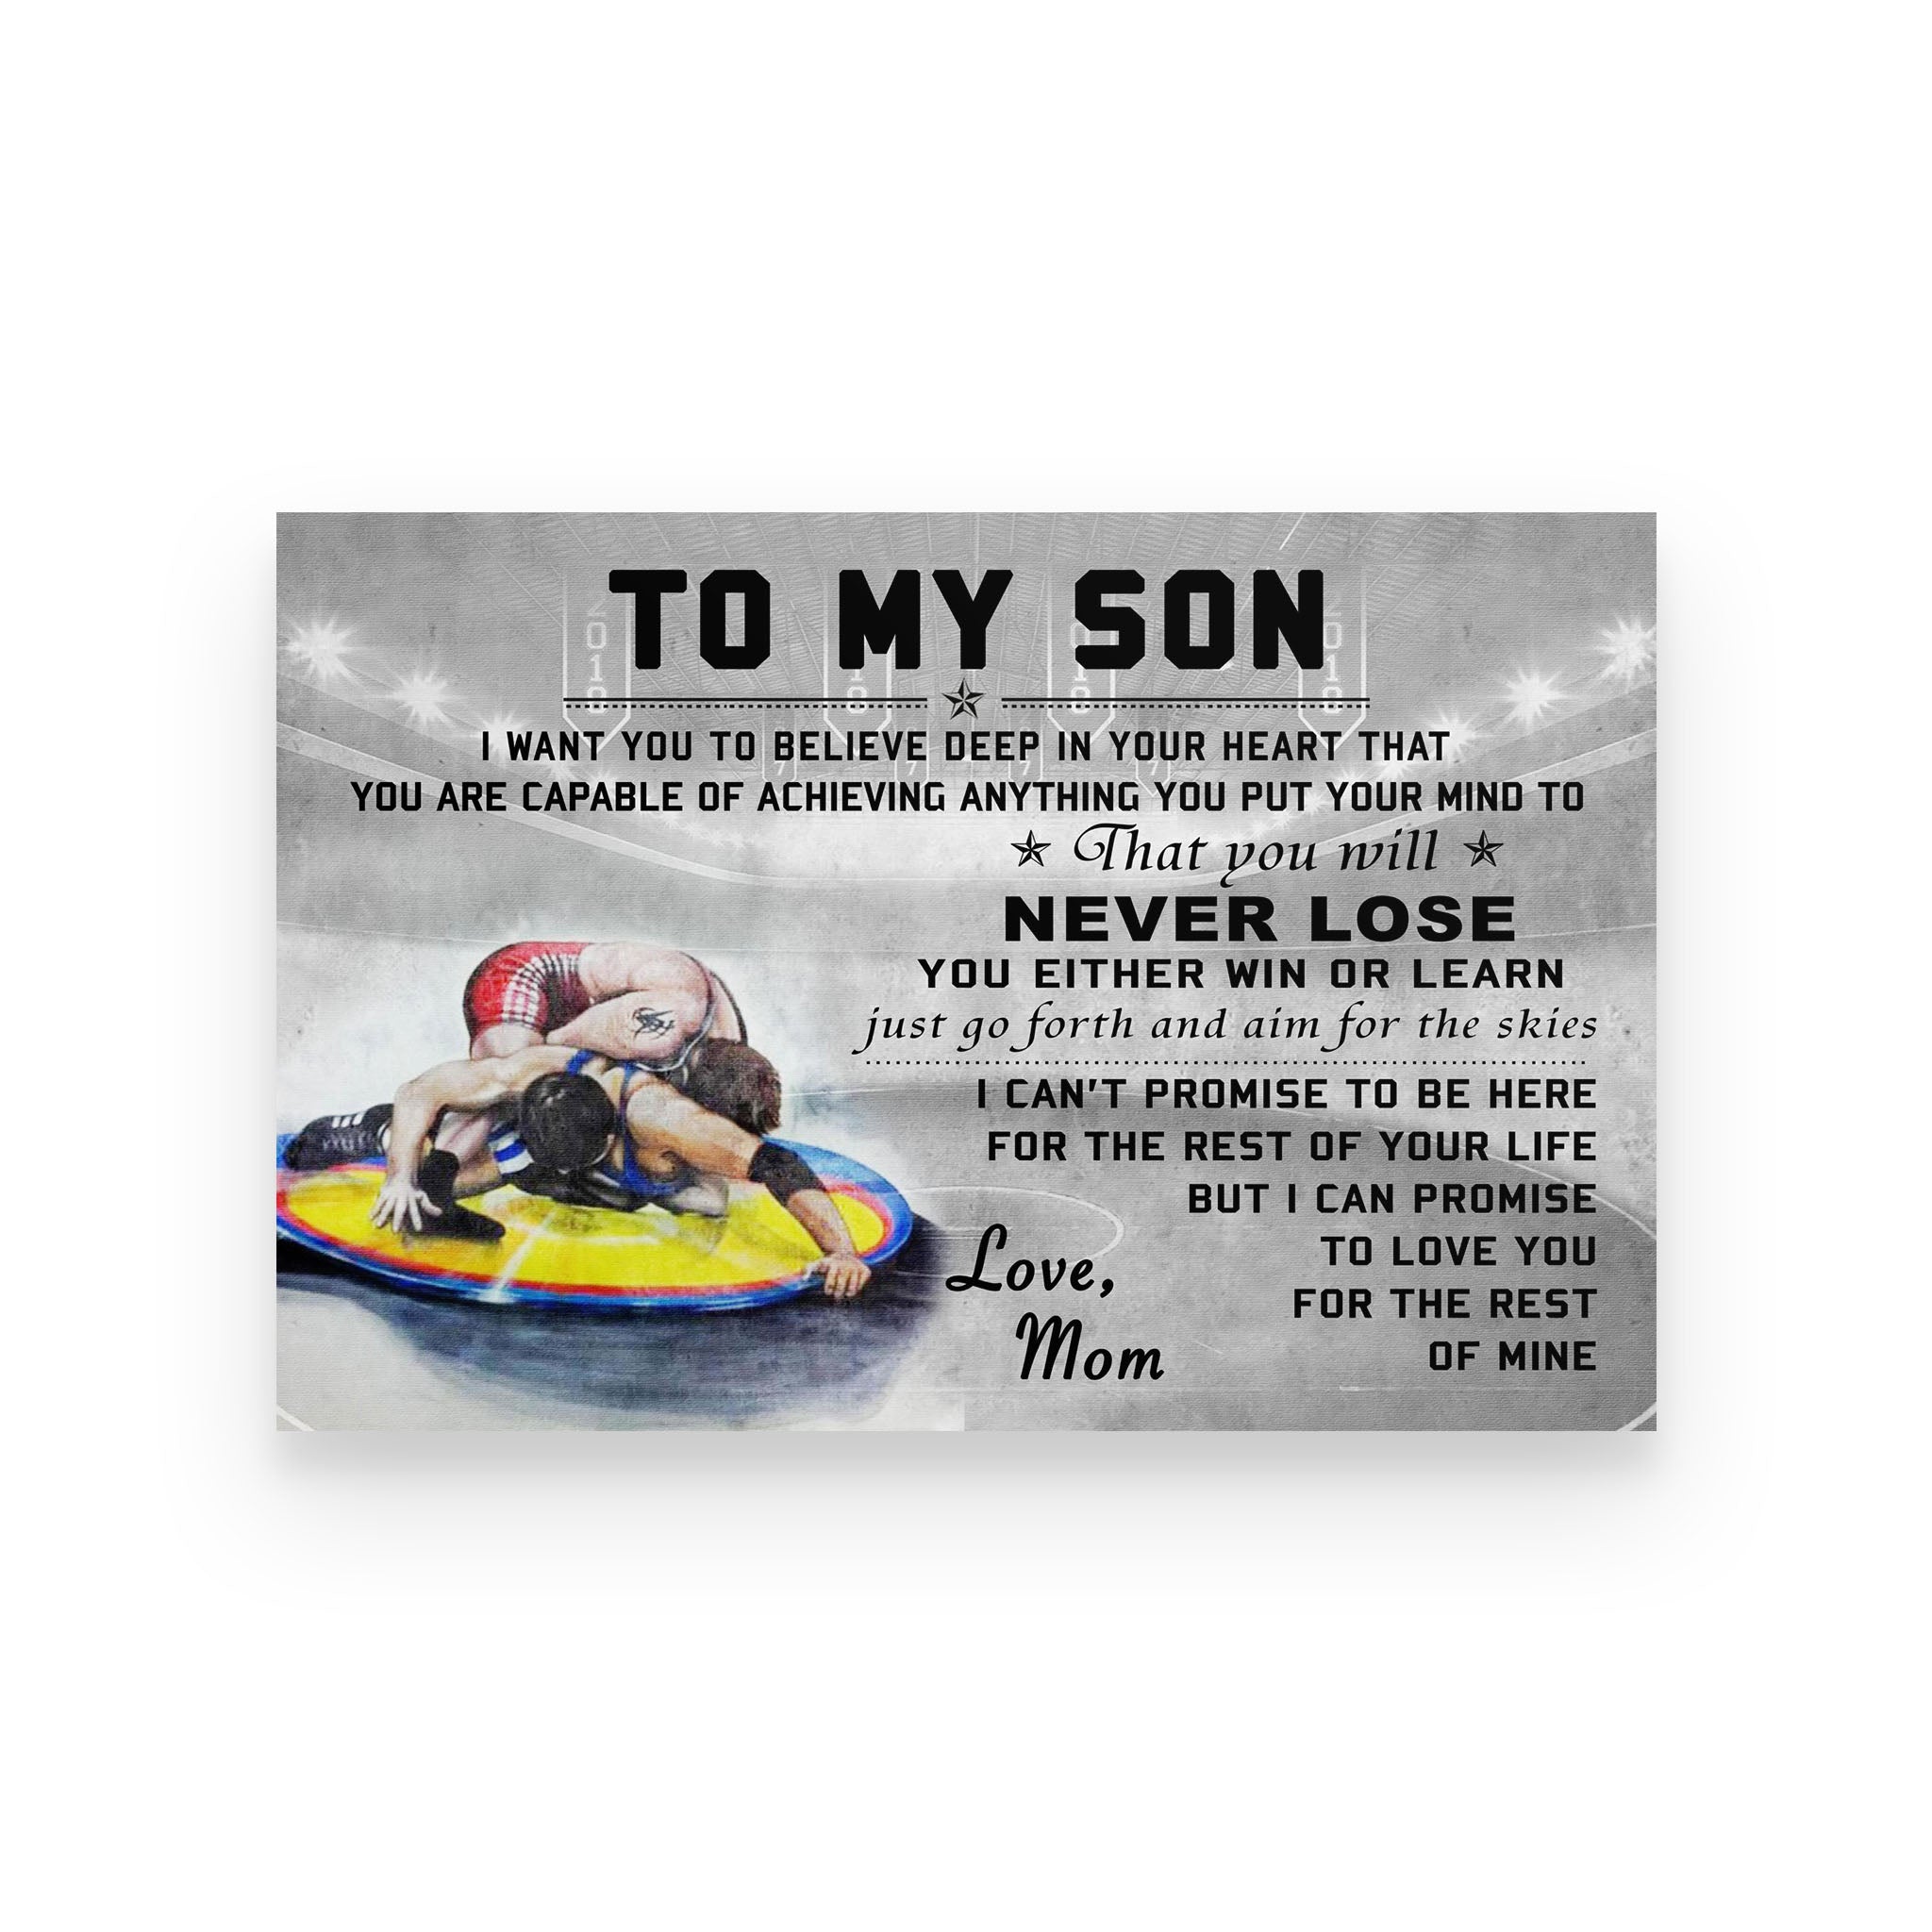 Wrestling poster mom to son I want you to believe deep in your heart vs3